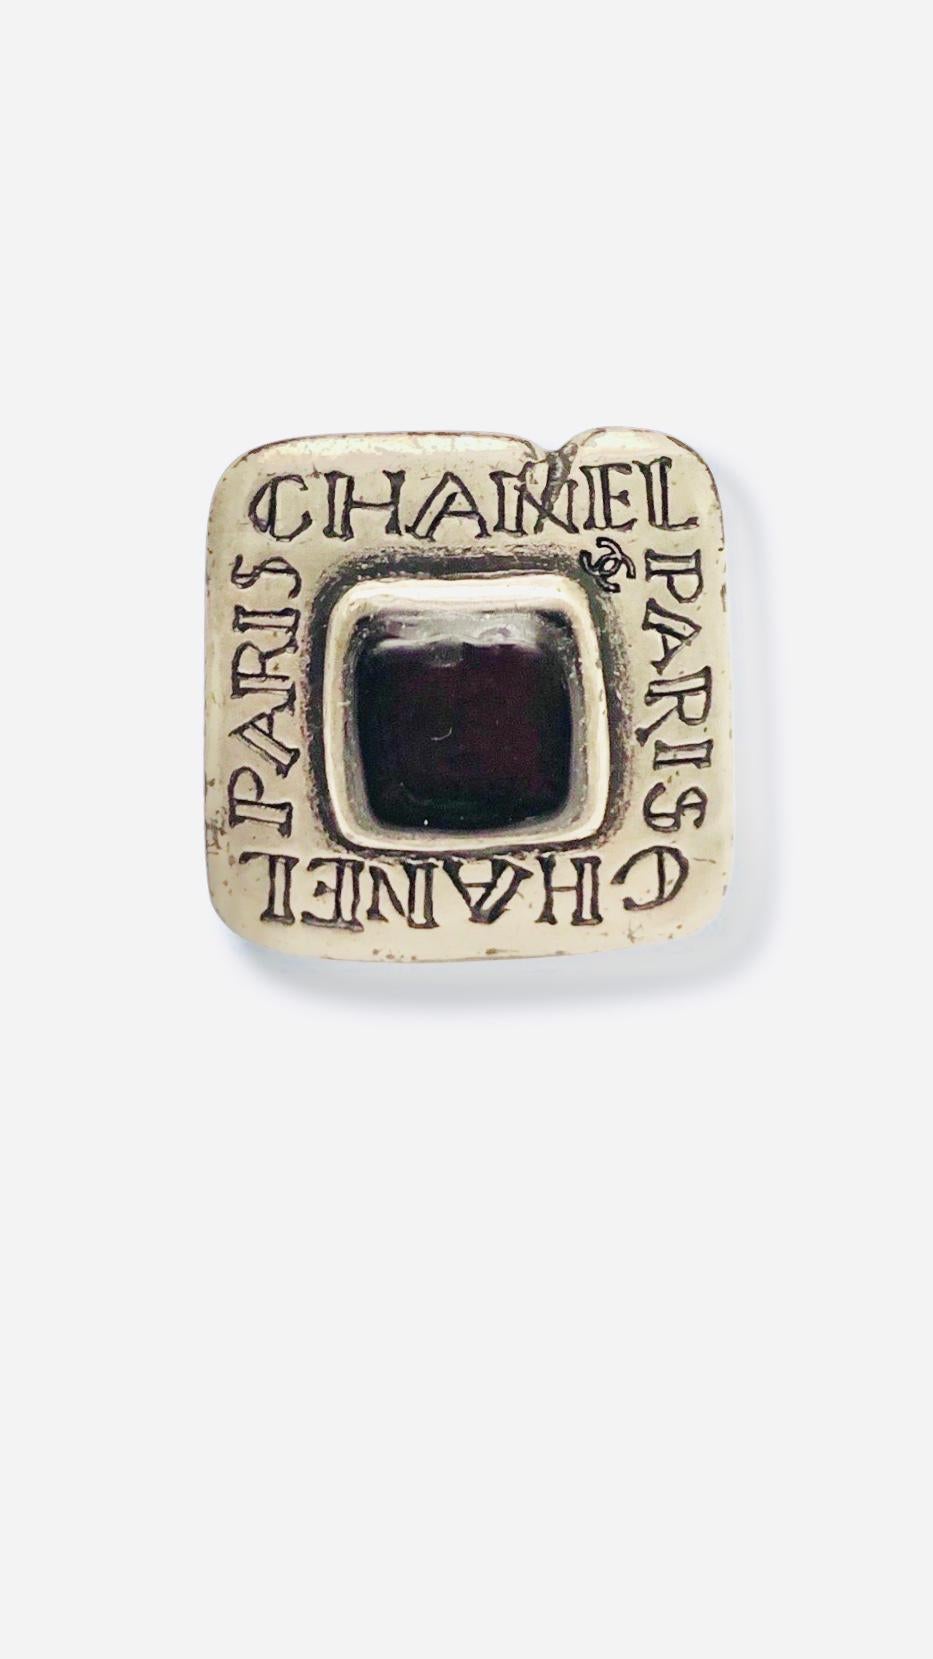 - Vintage 90s Chanel silver metal square clip on earrings.

- Engraved “Chanel Paris” in front and “31 Rue Cambon” at the back. 

- Size: 2cm x 2cm. 

